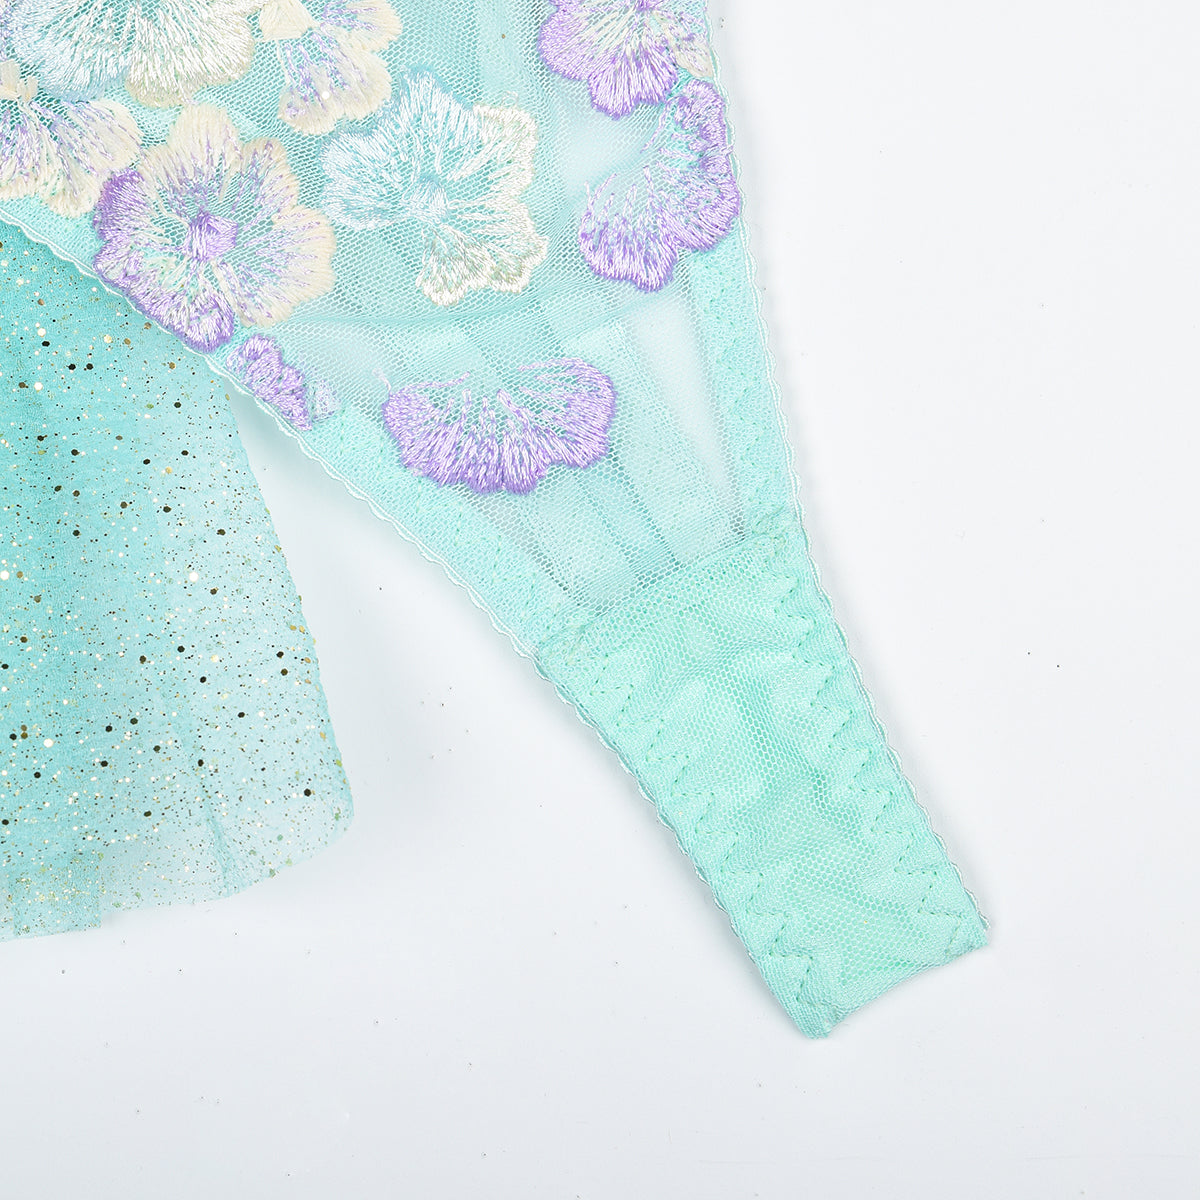 Azure Blooms: Light Blue Floral Embroidery Lingerie Set with Ruffle Skirt and Suspenders